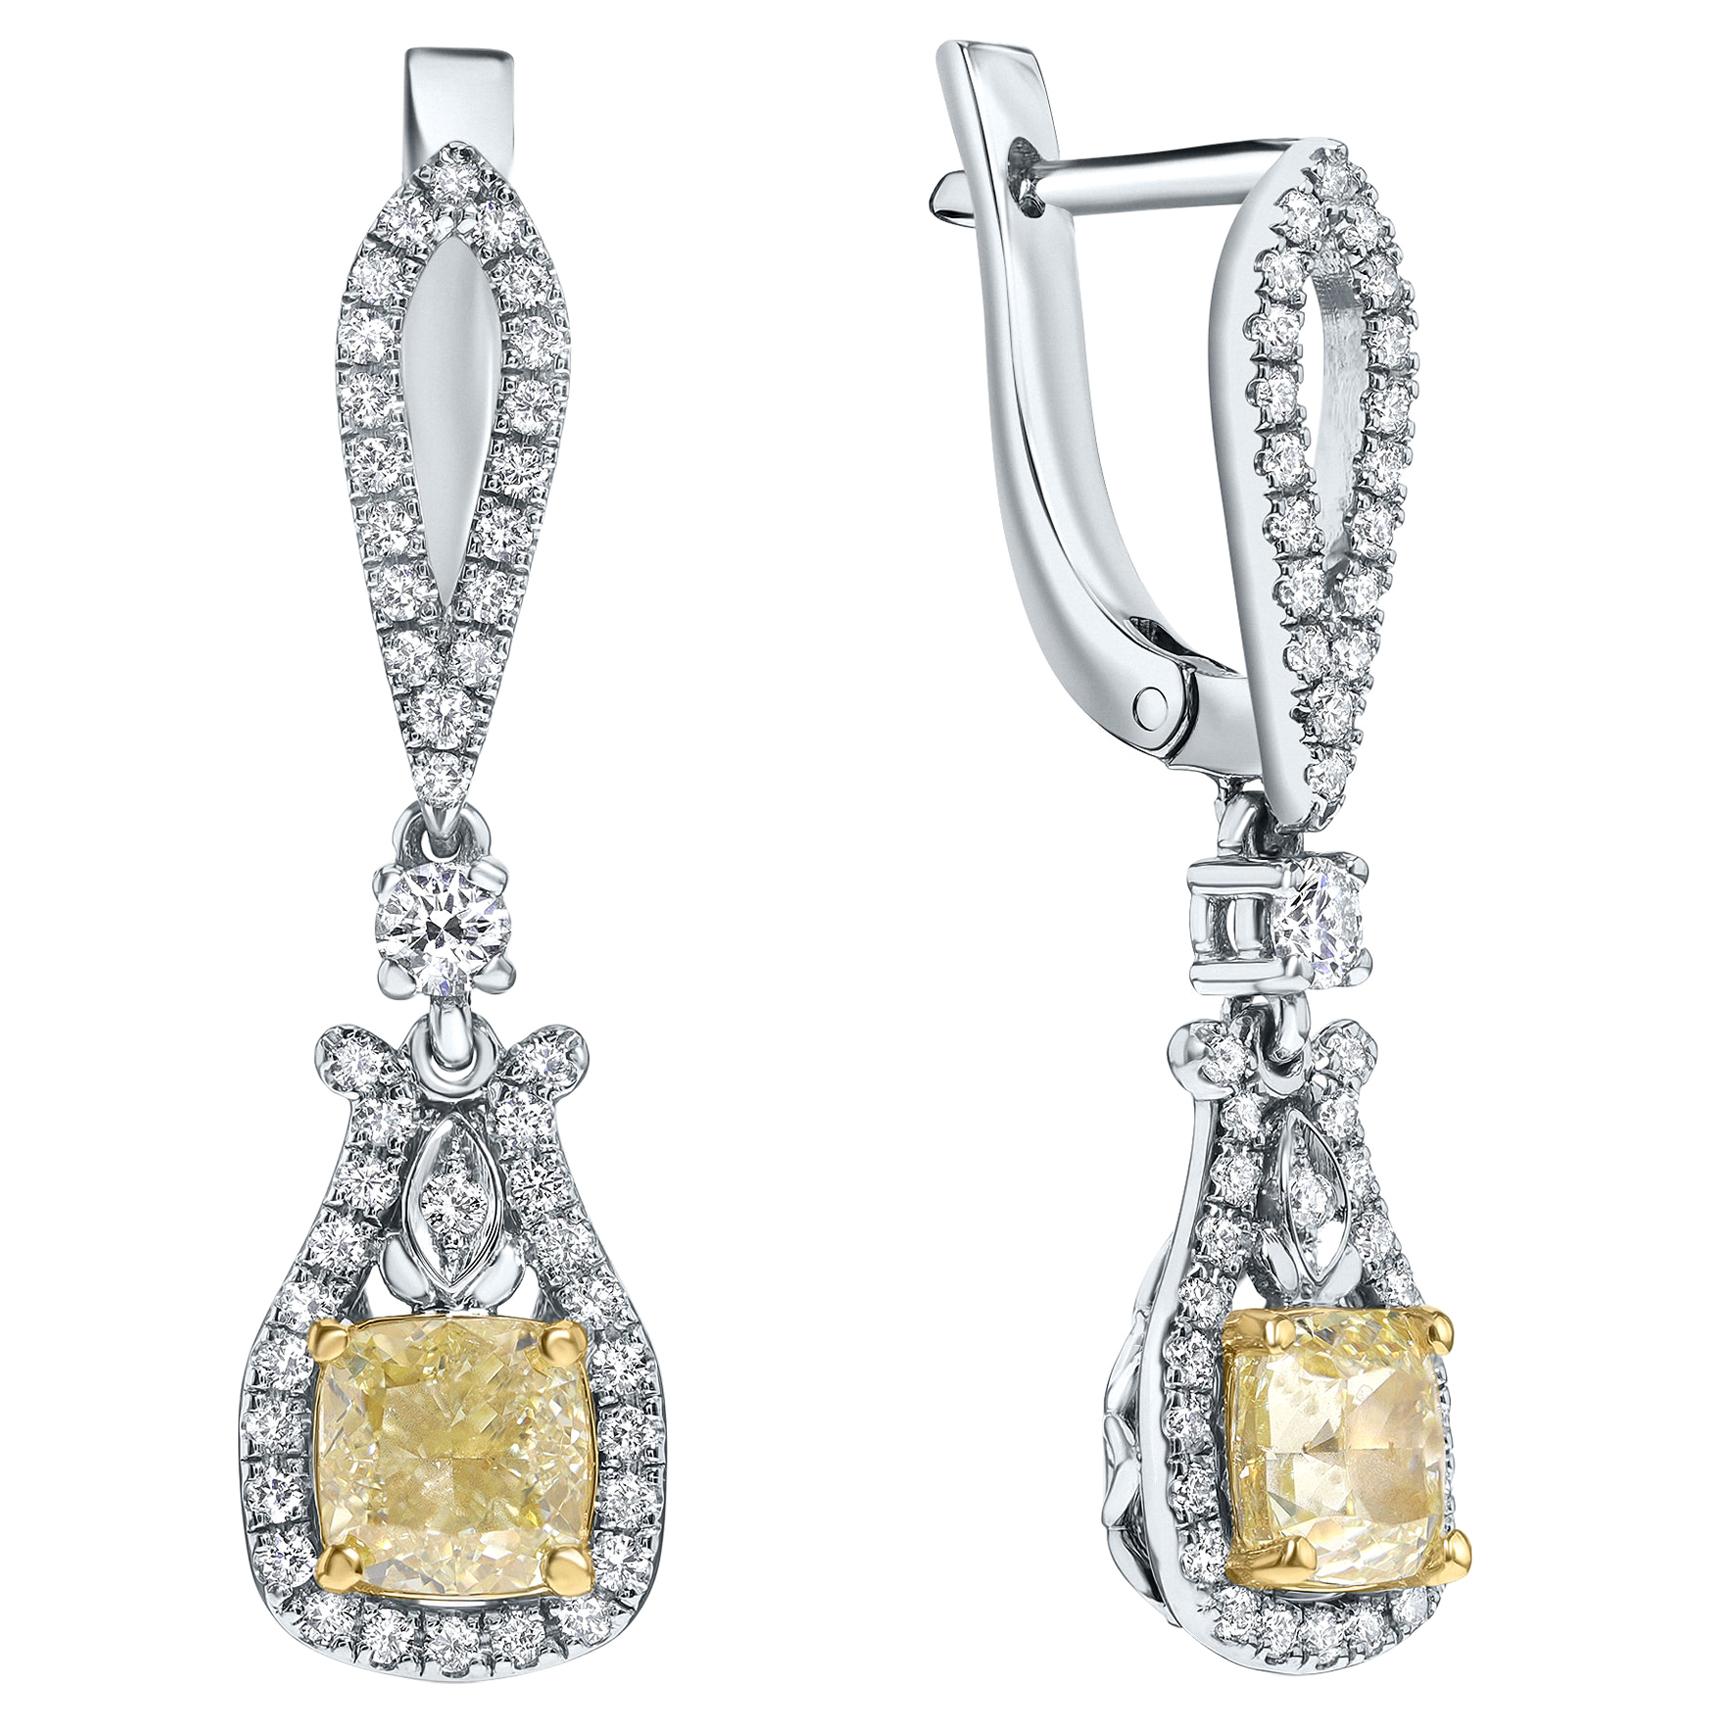 2.57 CT IGI Certified Natural Fancy Yellow and White Diamond Earrings White Gold